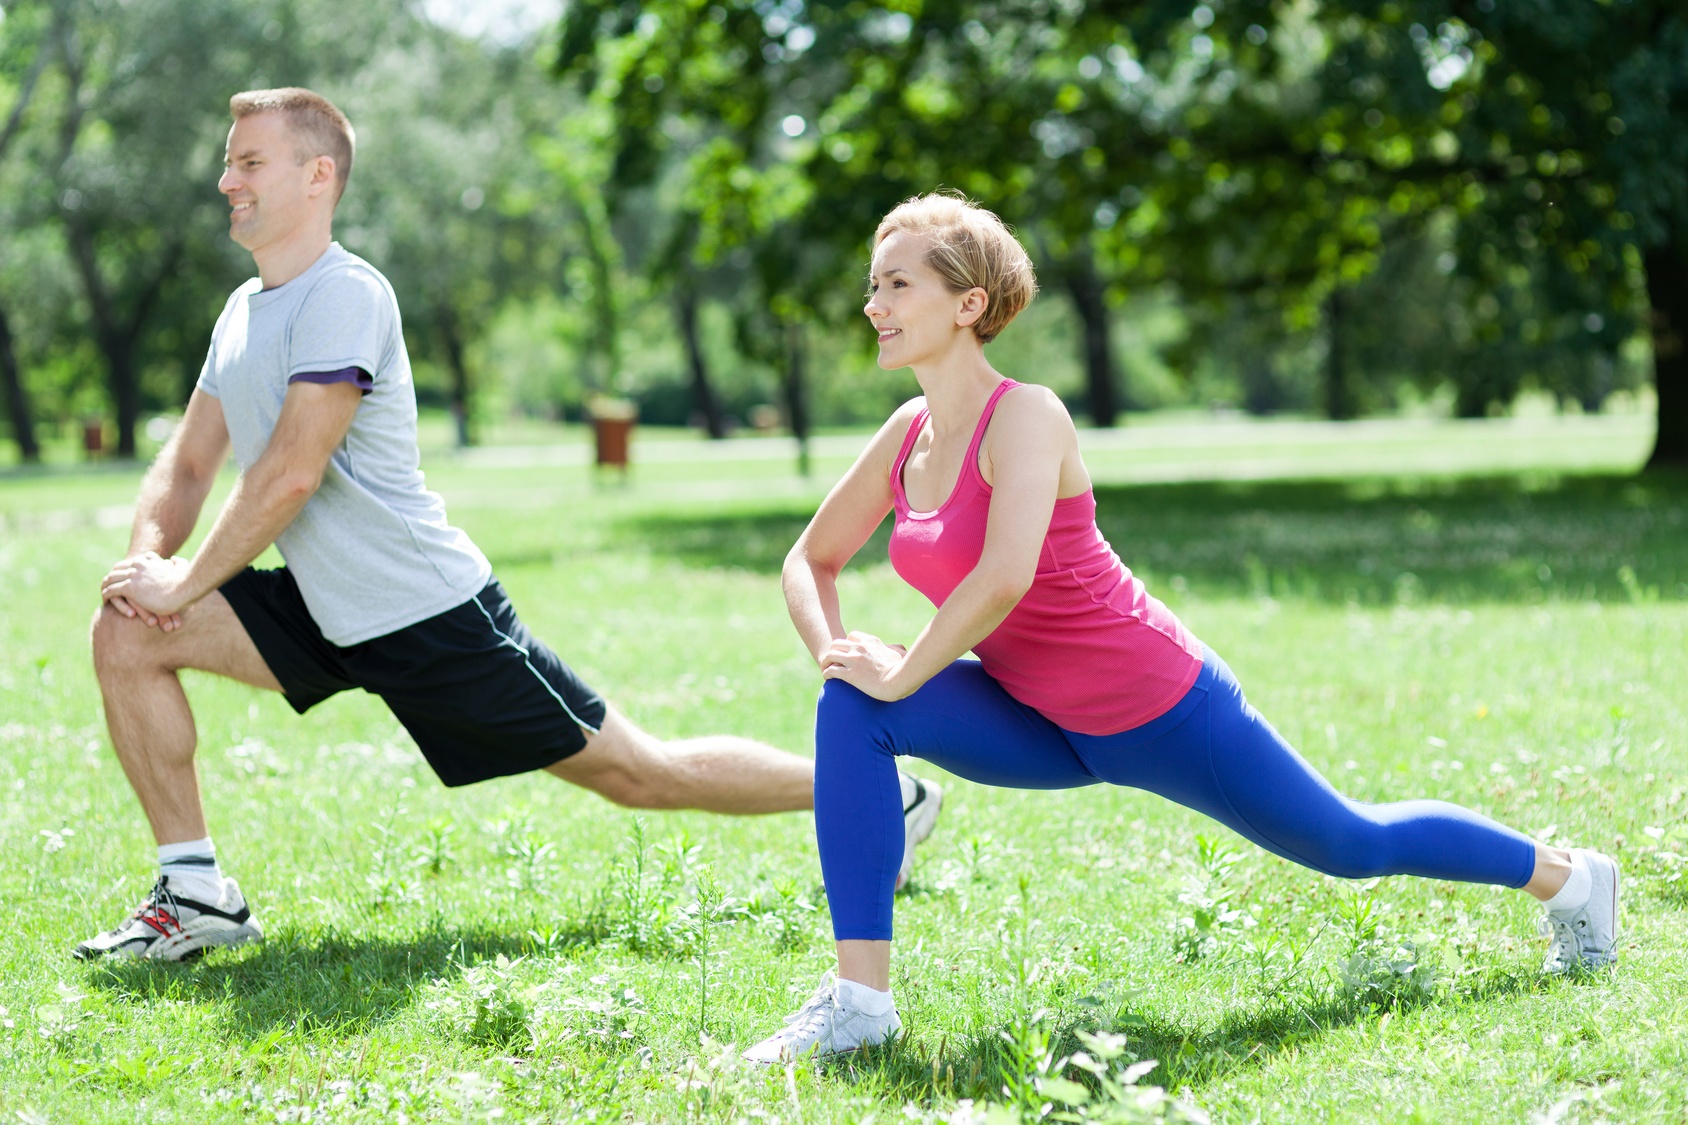 Man and woman doing stretching exercises